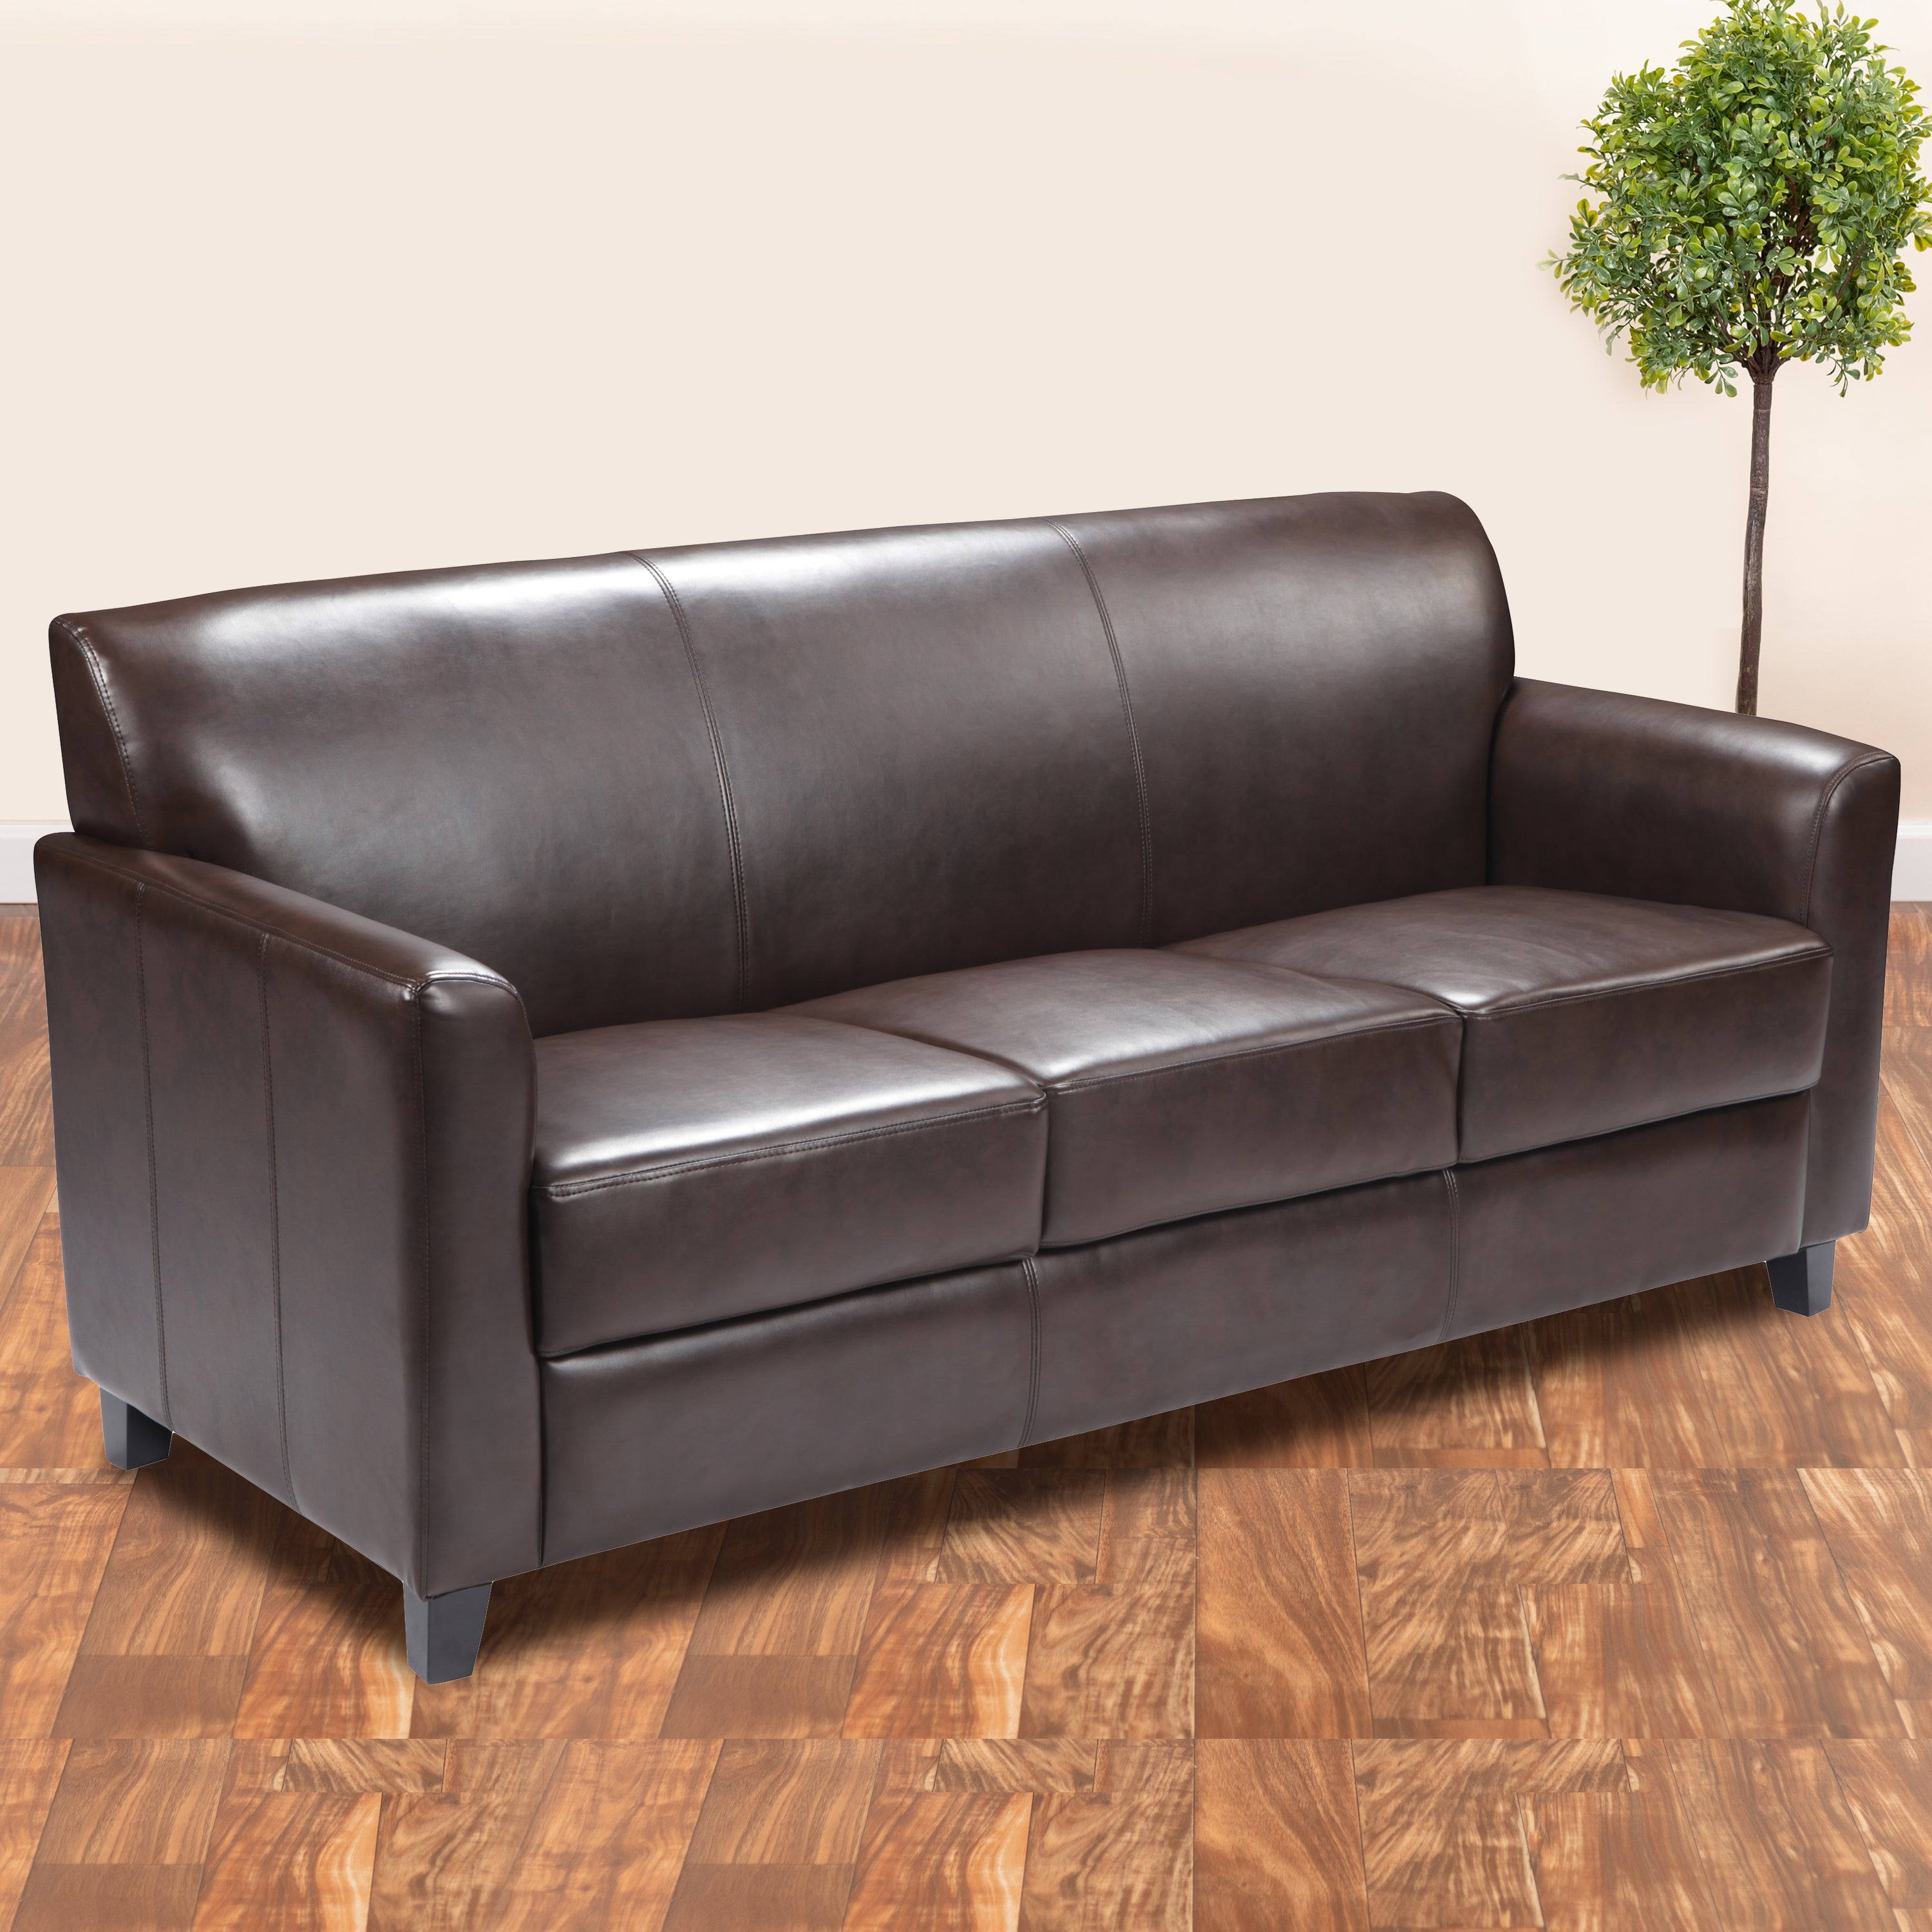 HERCULES Diplomat Series LeatherSoft Sofa with Clean Line Stitched Frame-Reception Sofa-Flash Furniture-Wall2Wall Furnishings